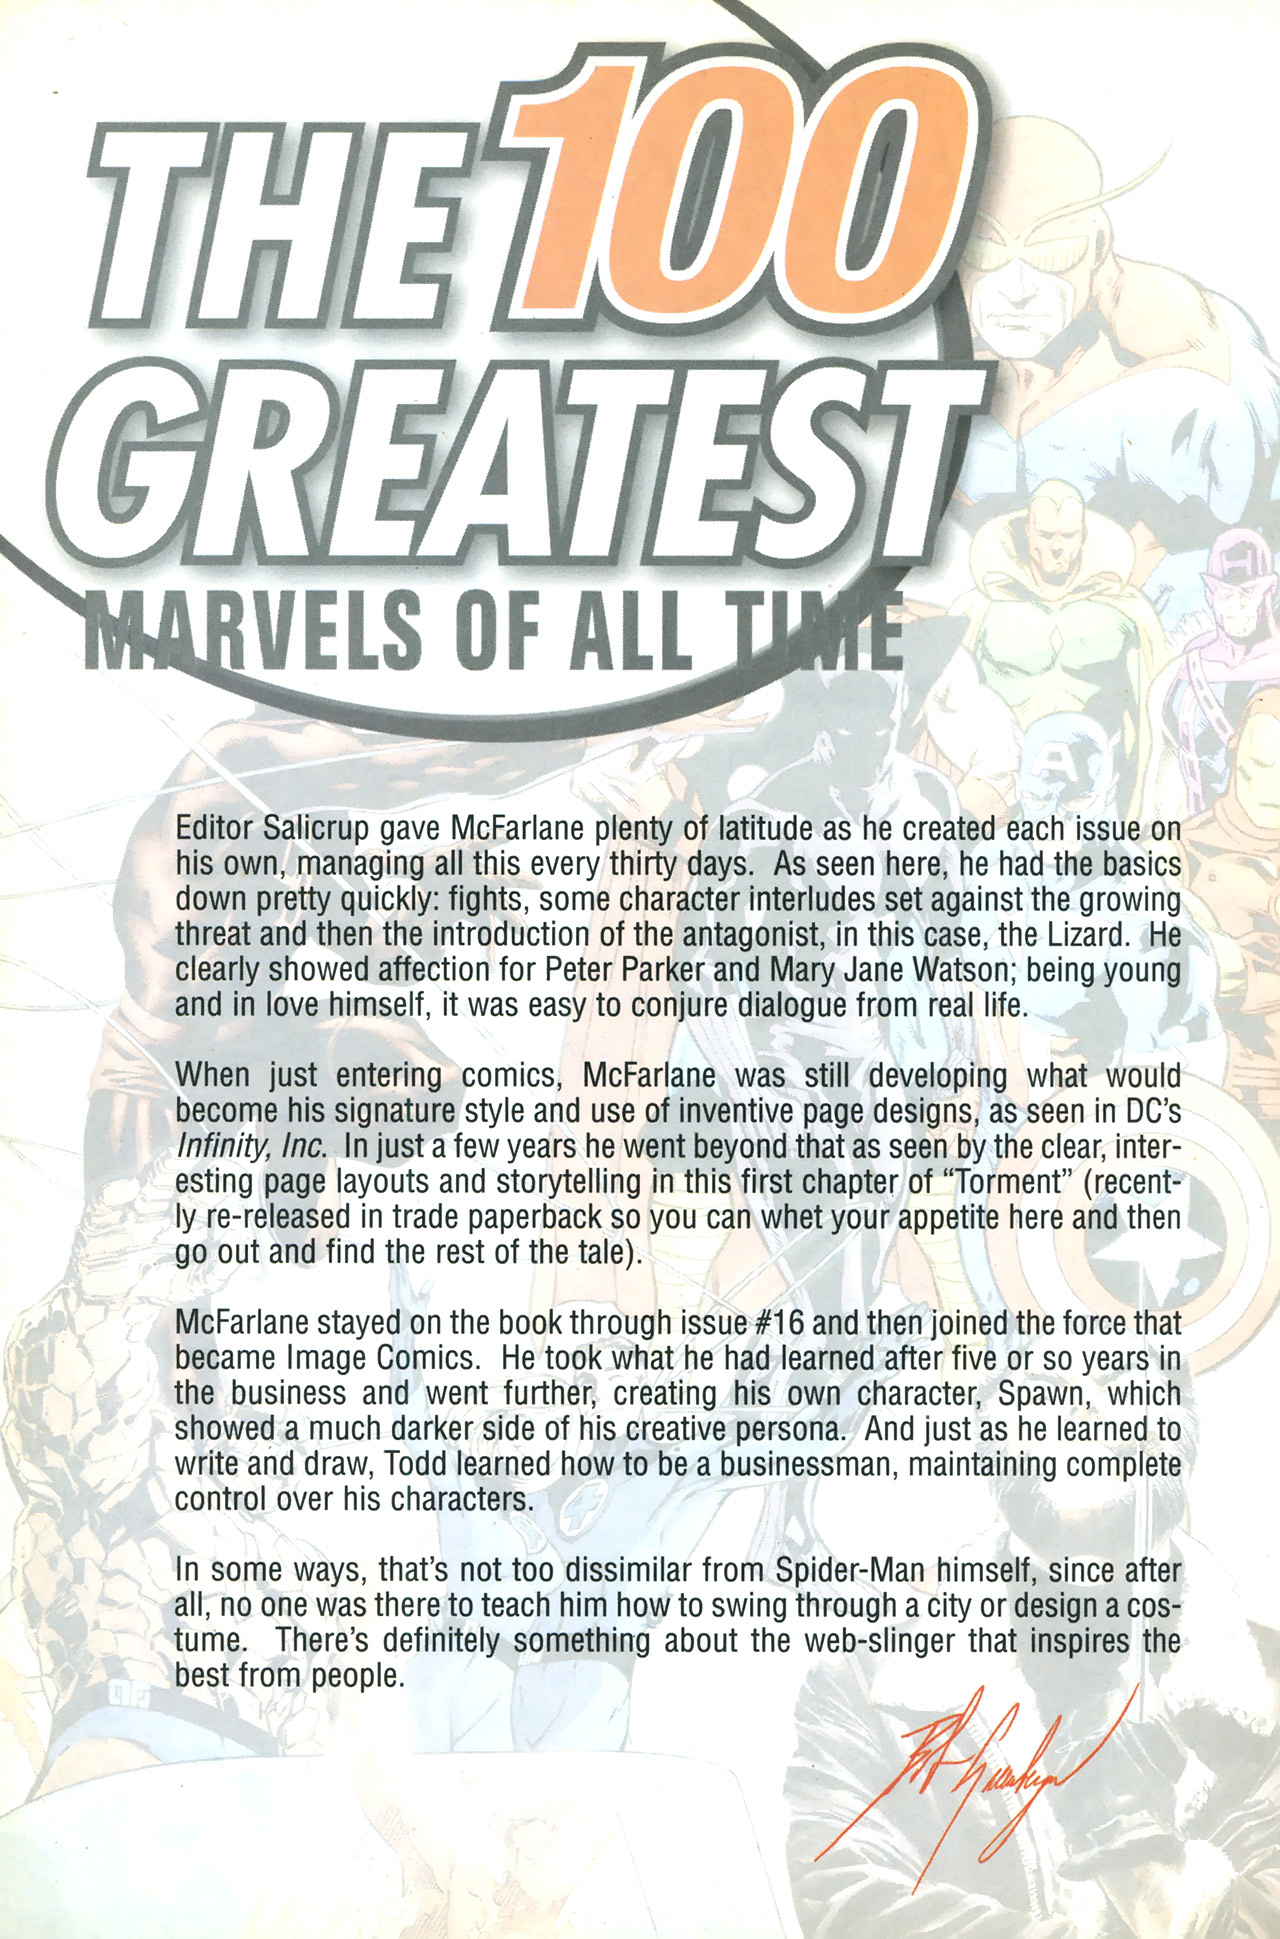 Read online The 100 Greatest Marvels of All Time comic -  Issue #3 - 89